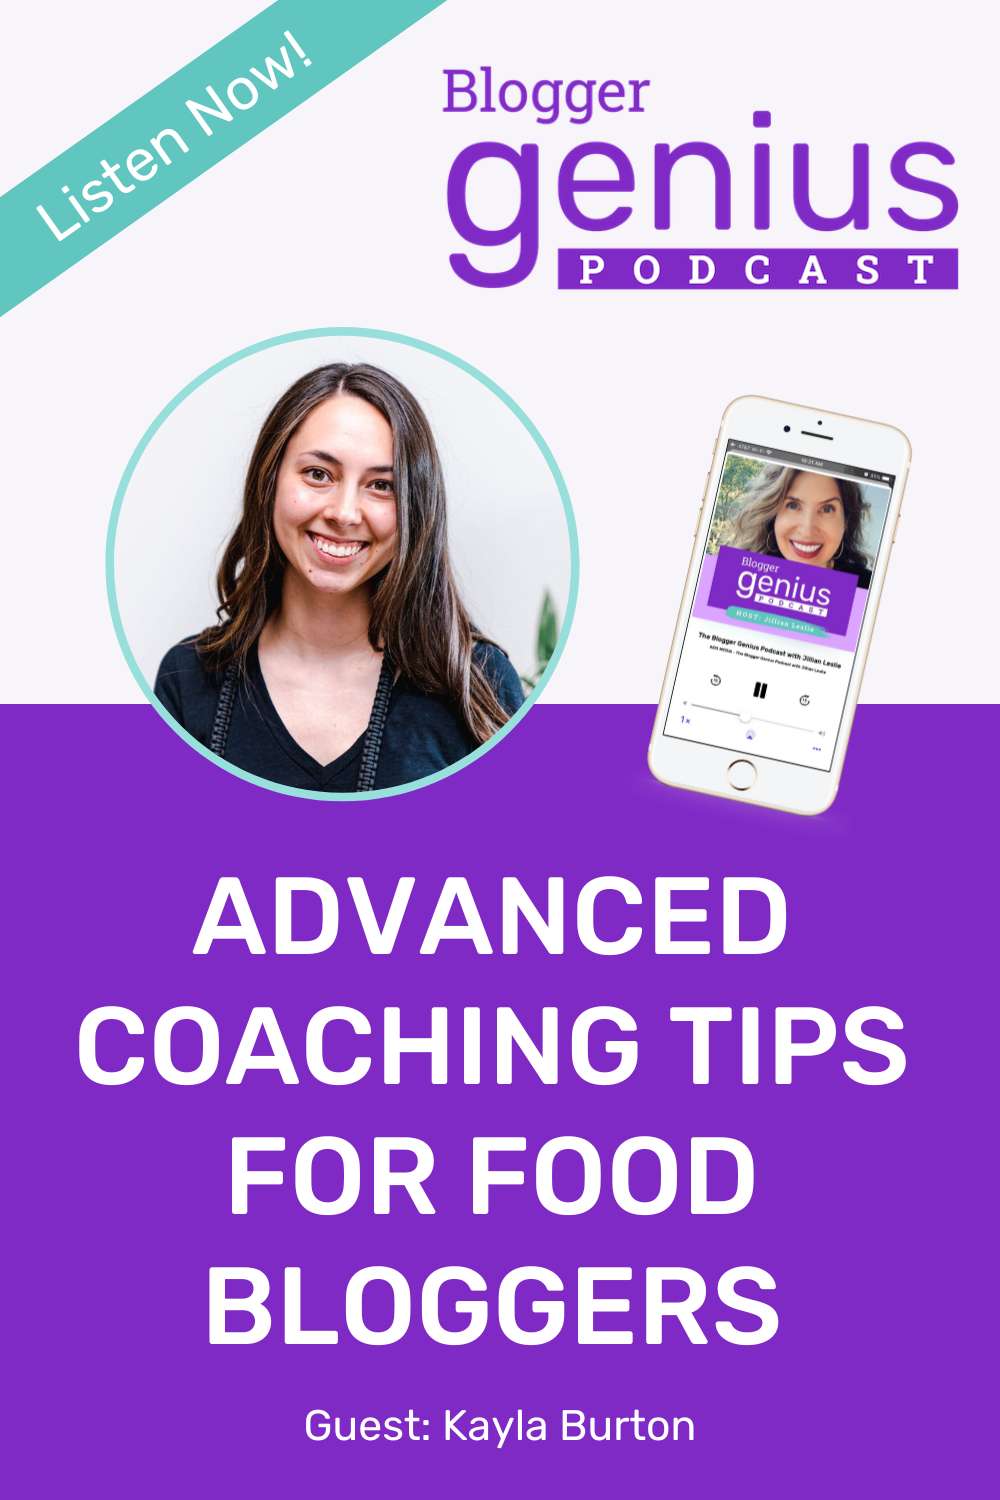 Advanced Coaching Tips for Food Bloggers | The Blogger Genius Podcast with Jillian Leslie